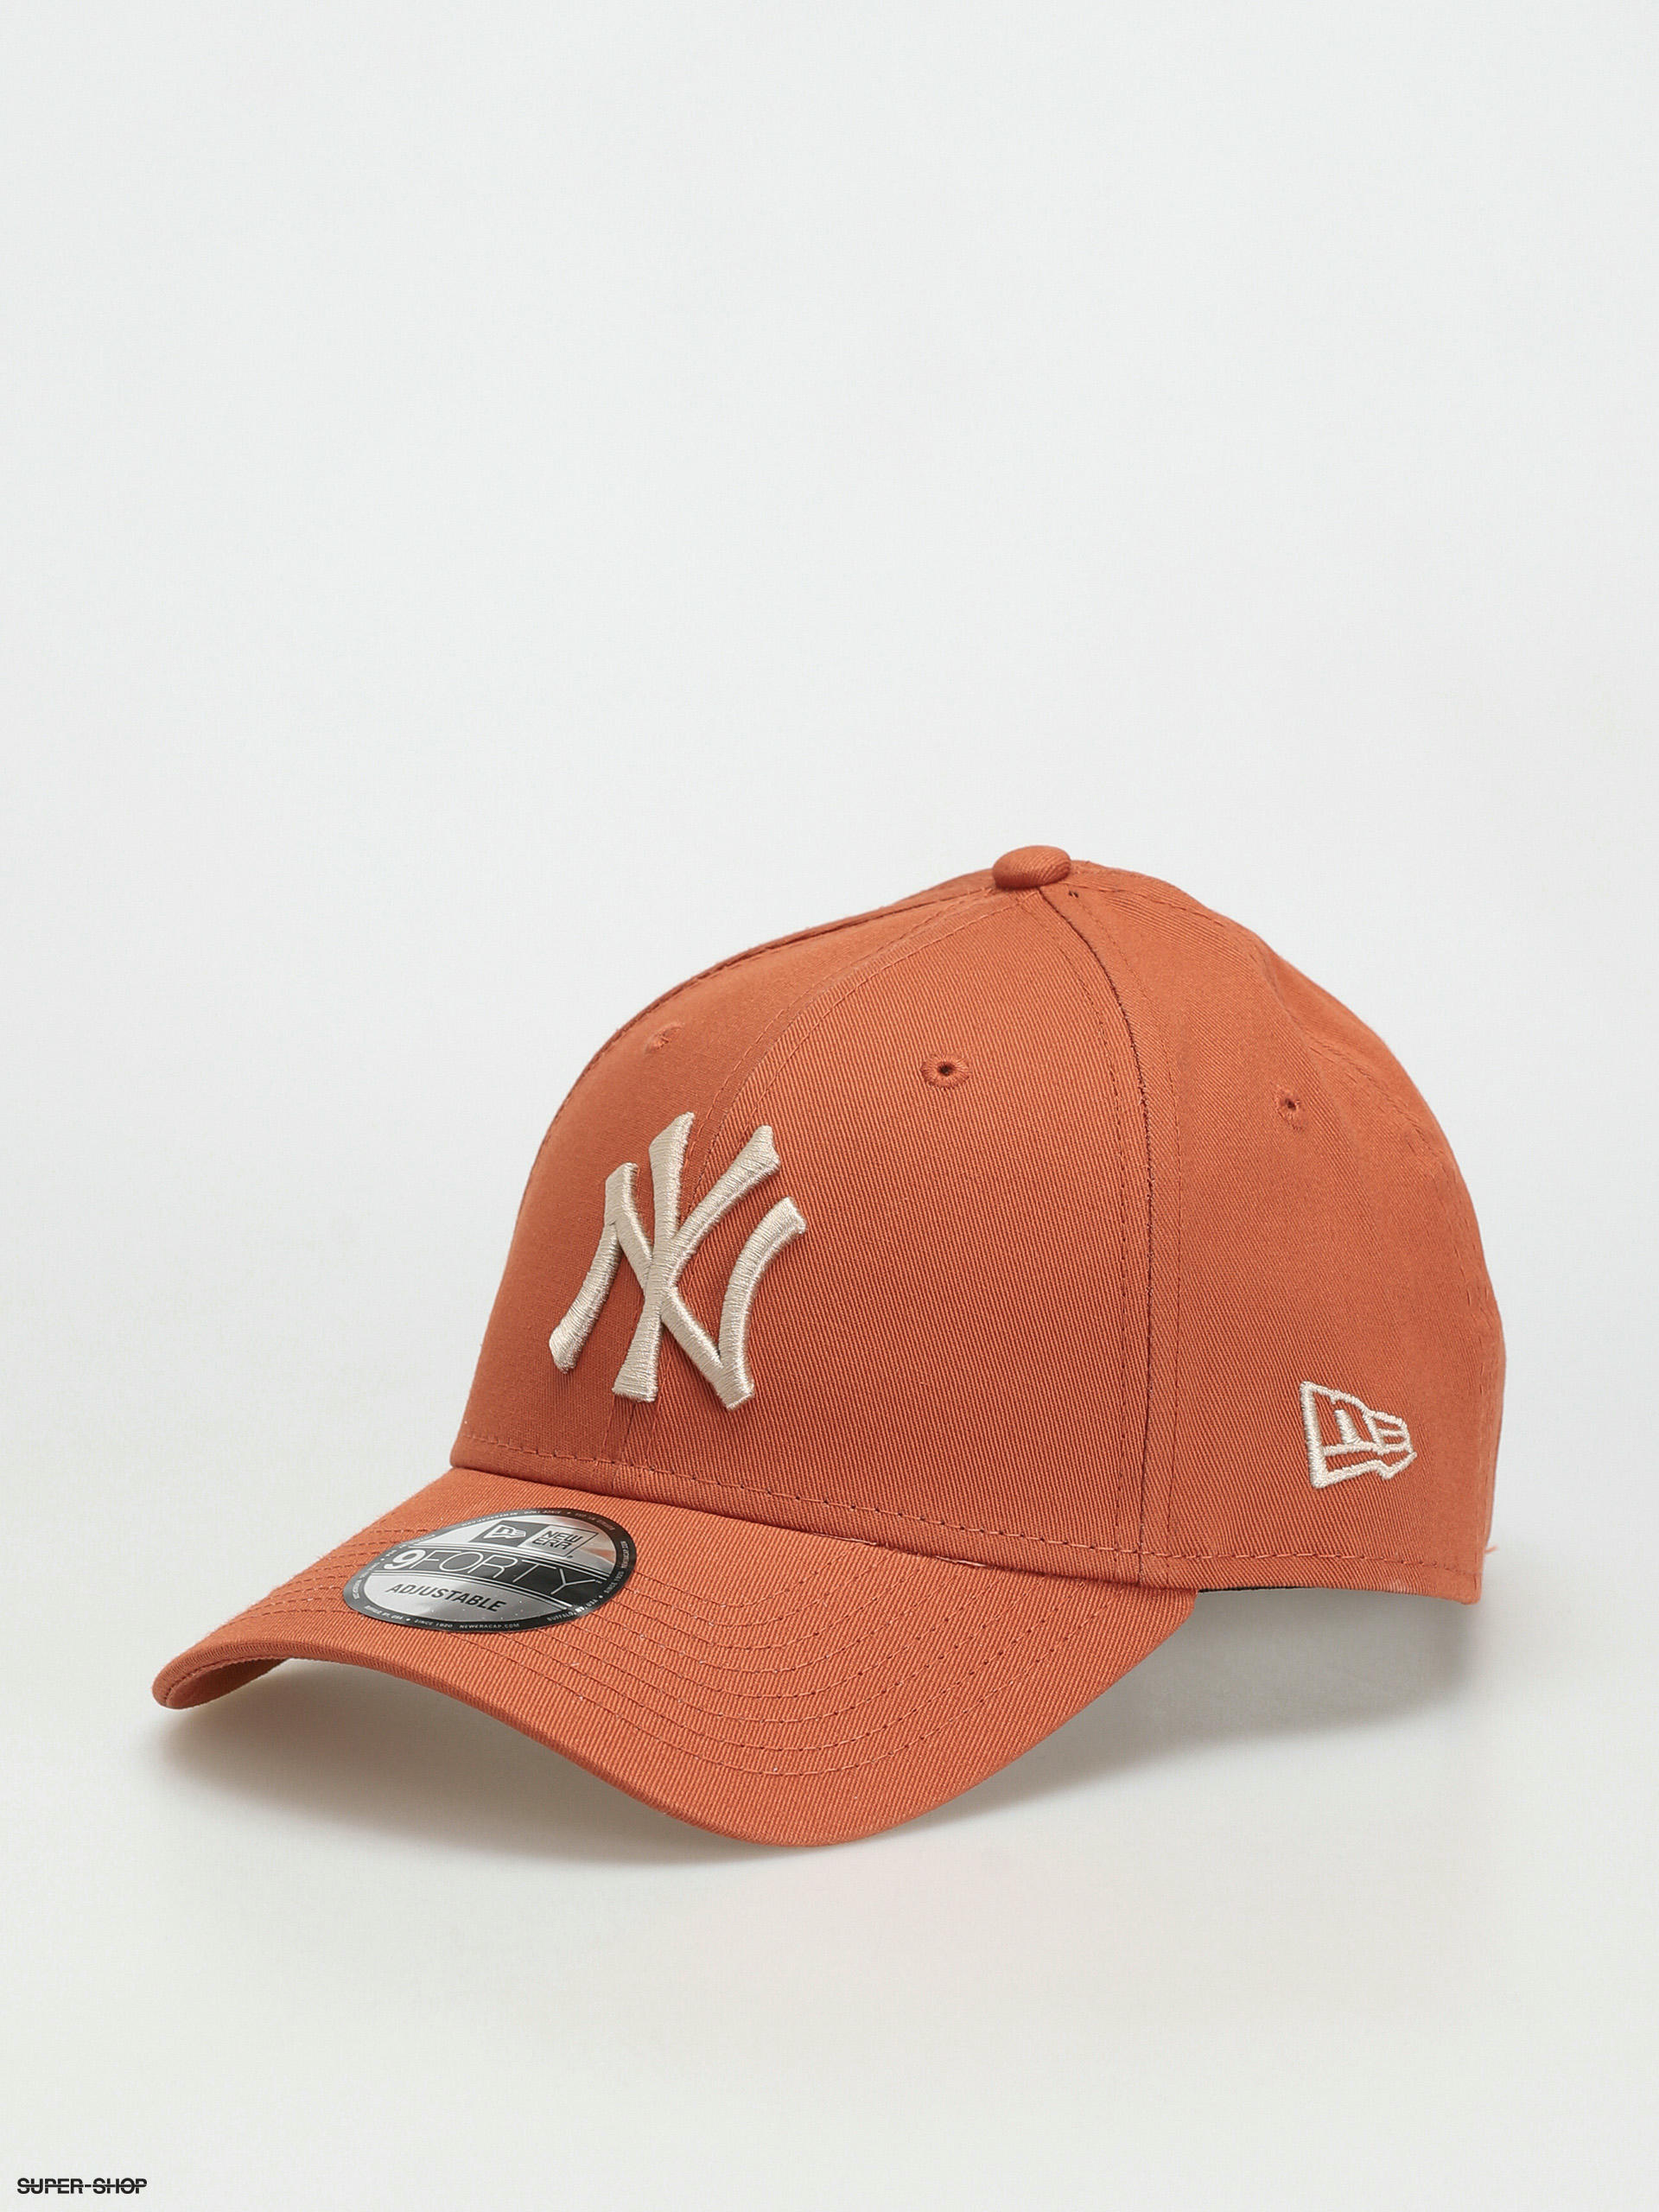 NEW YORK YANKEES GRAY RED NEW ERA 59FIFTY FITTED HAT – Sports